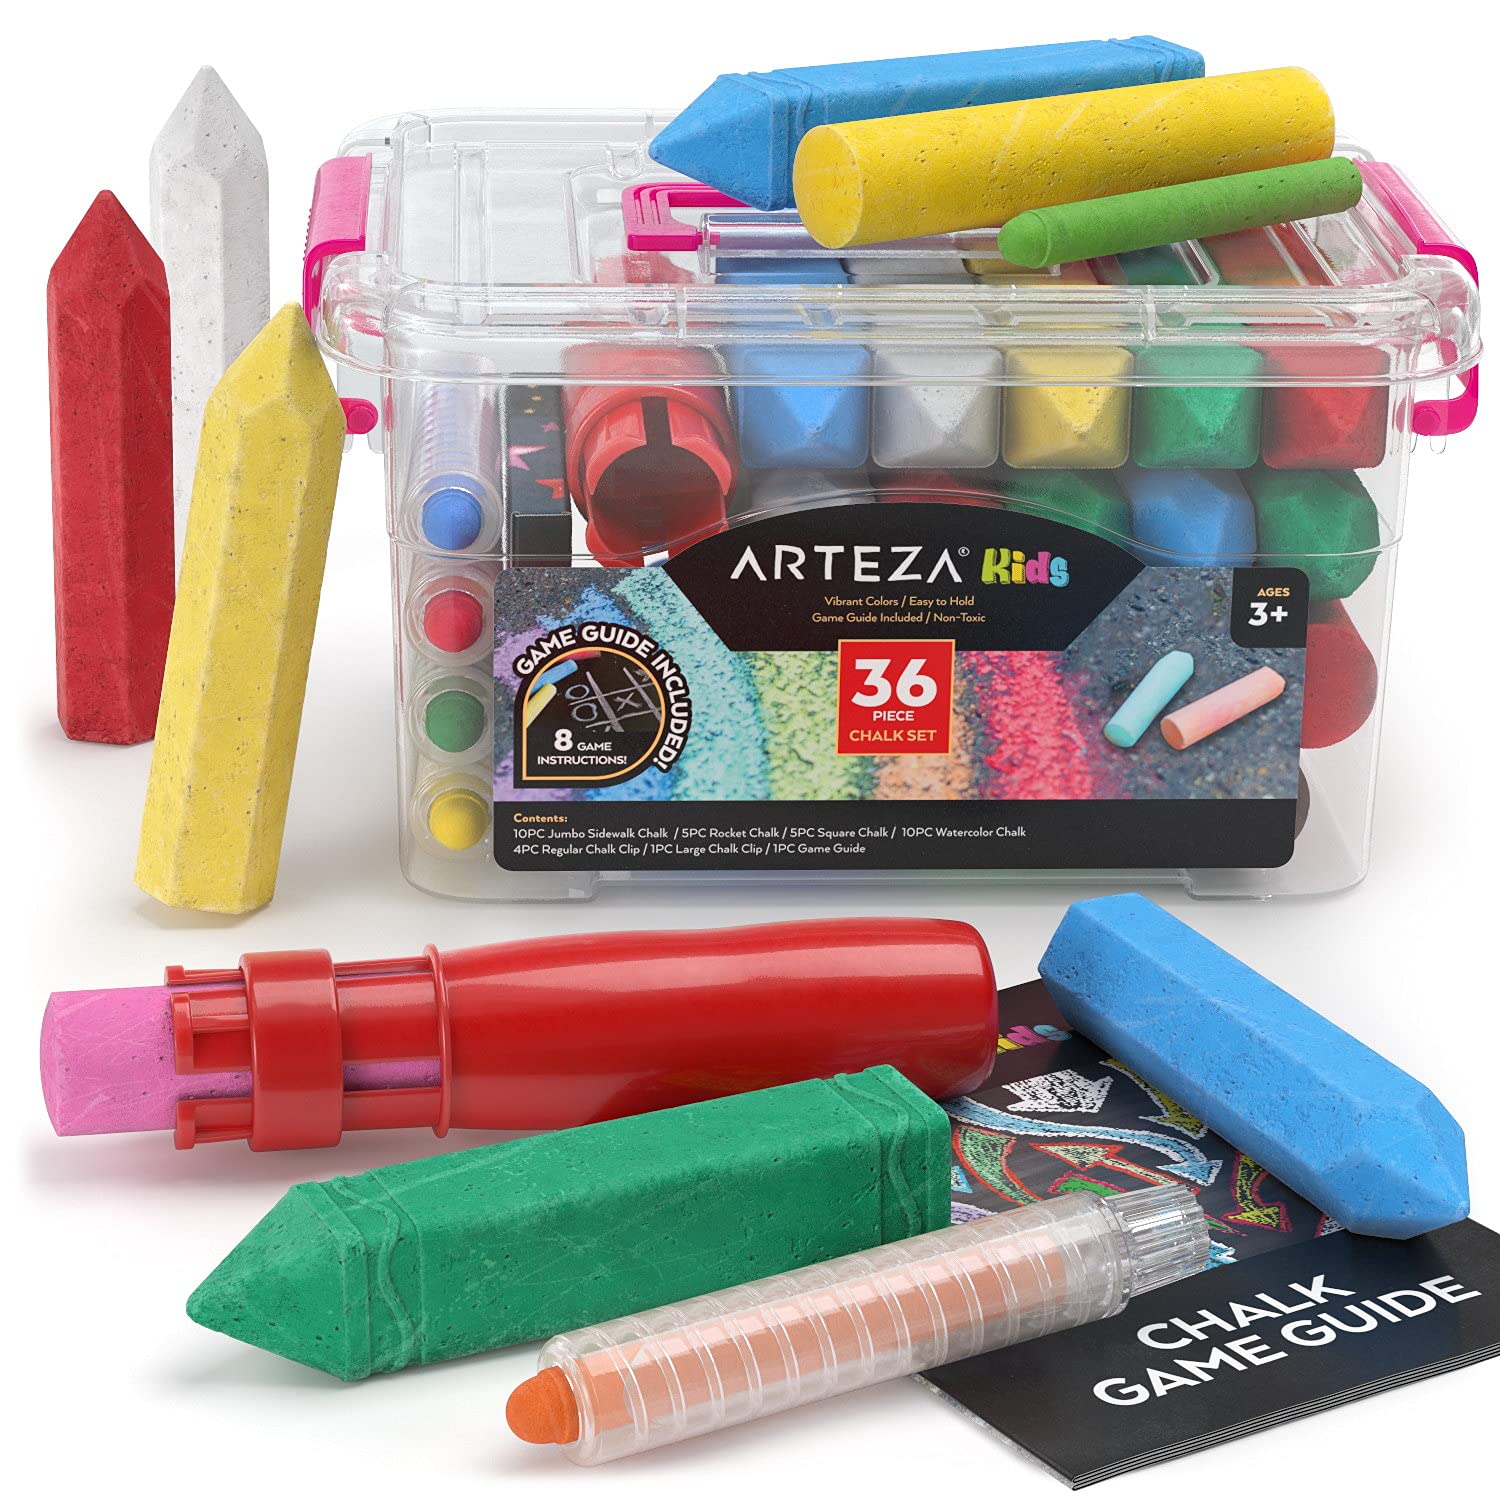 Arteza Kids Sidewalk Chalk, Set of 36 Pieces, Easy-to-Hold Handmade Washable Chalk with a Game Guide, Art Supplies for Outdoors, Spring and Summer Activities, and Chalkboard Art